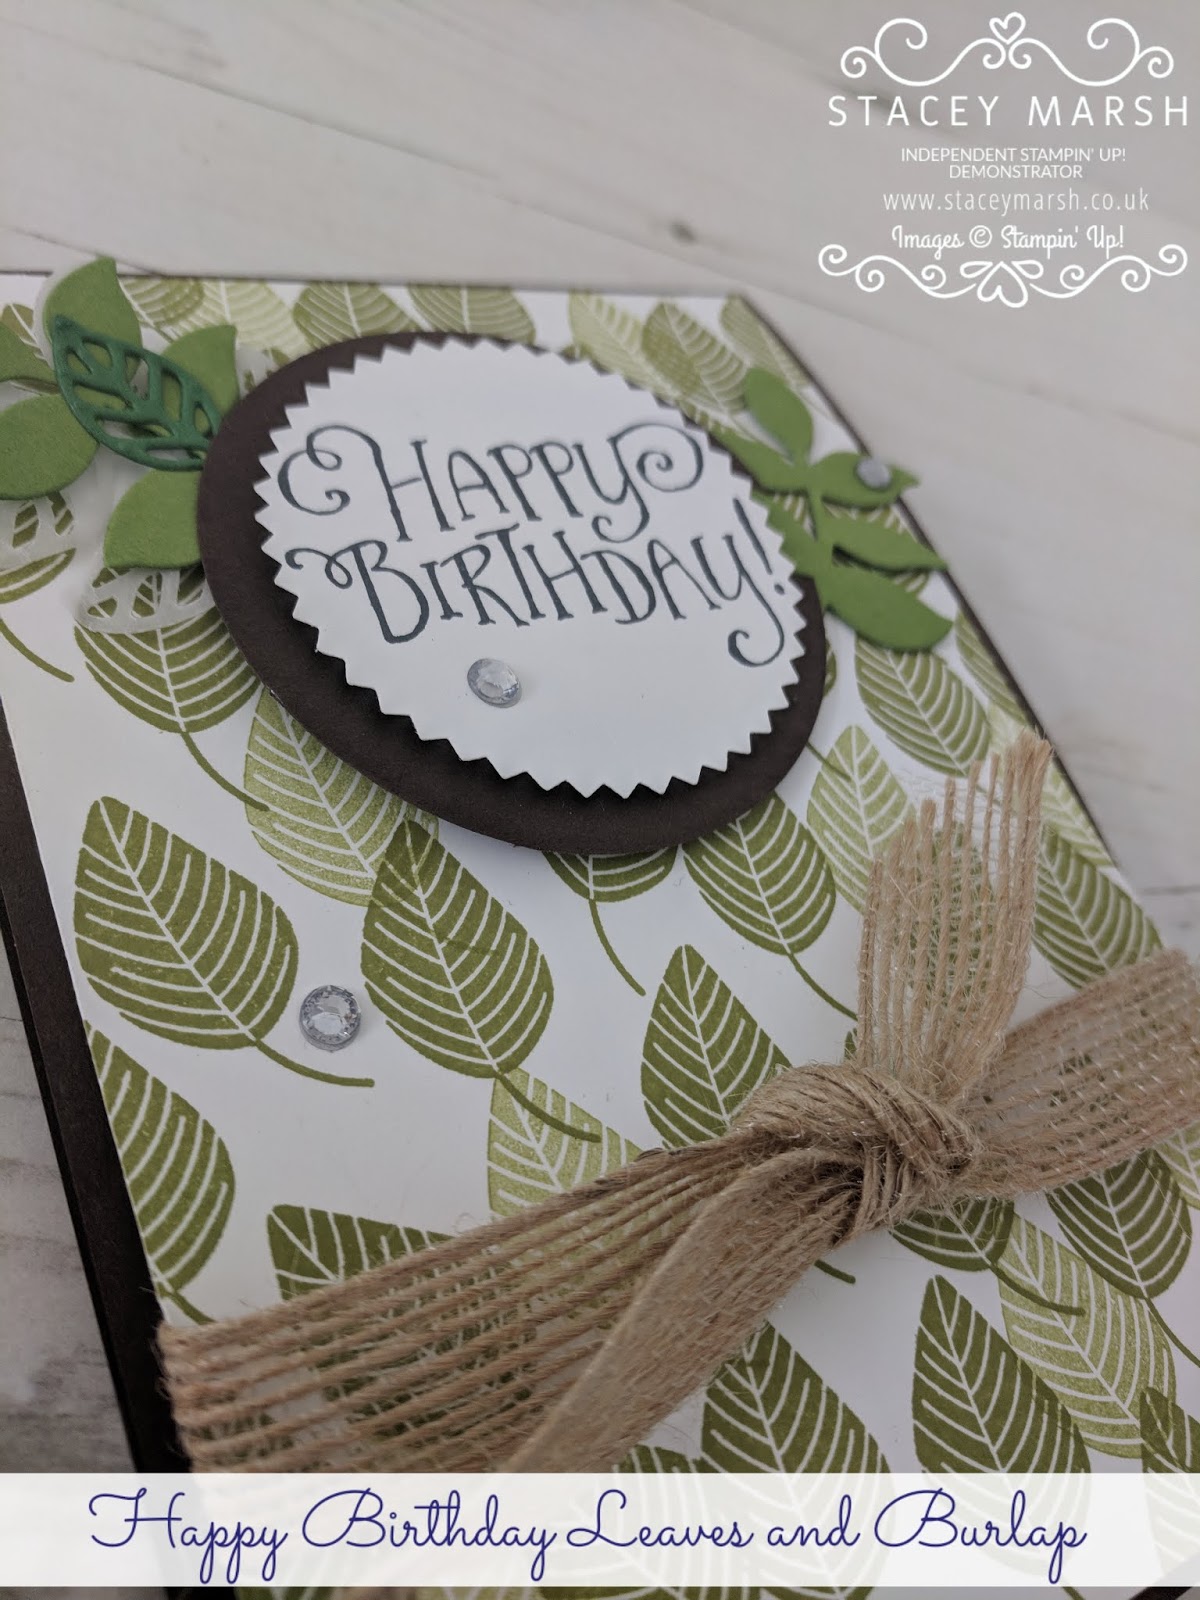 HAPPY BIRTHDAY LEAVES AND BURLAP | STACEY MARSH